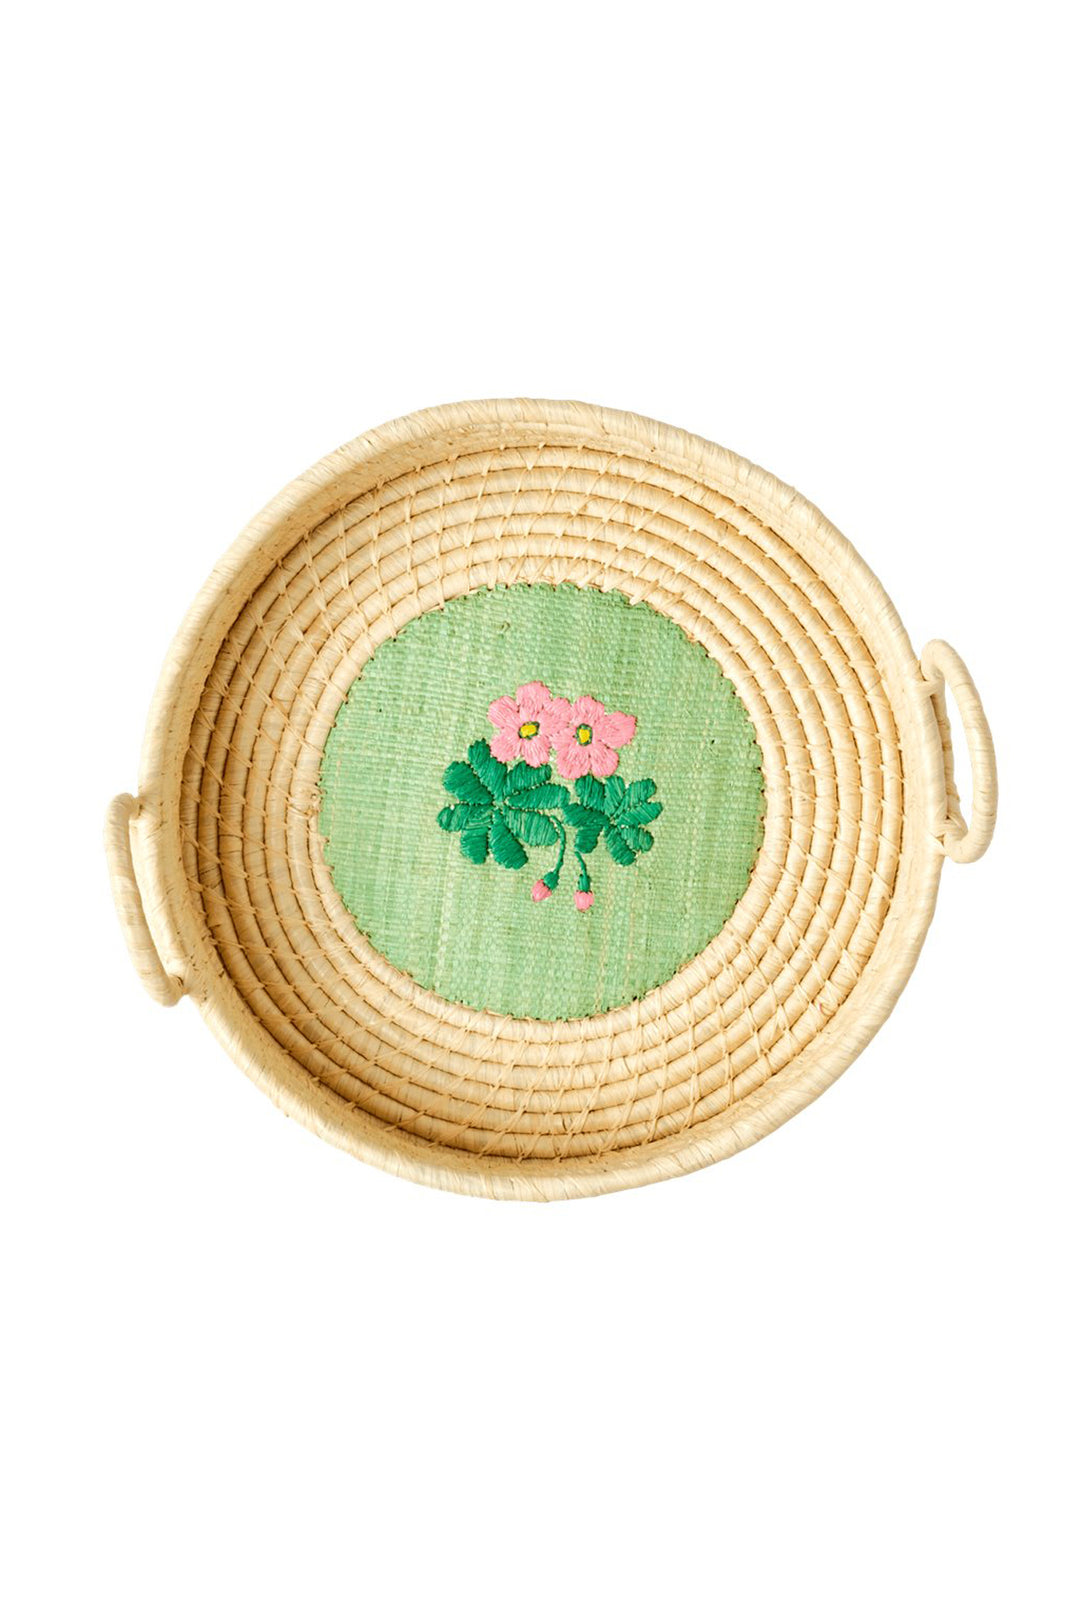 Raffia Round Bread Basket with Flower Embroidery Pale Green